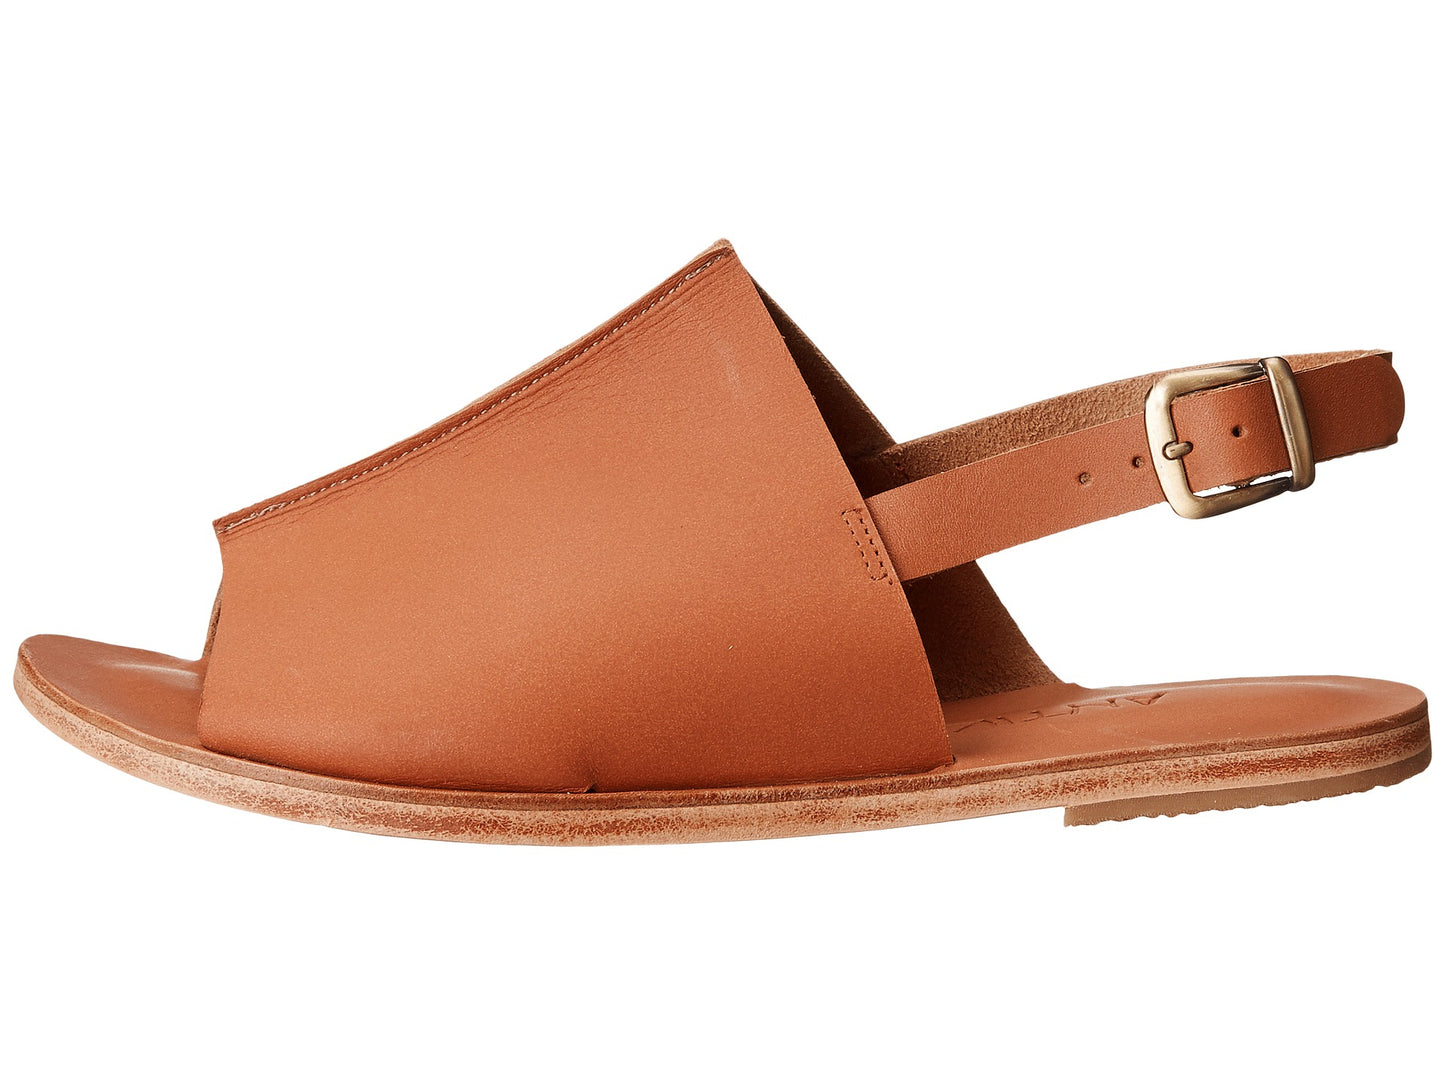 Montana Blvd tan, handmade leather with back strap buckle sandals - Side View